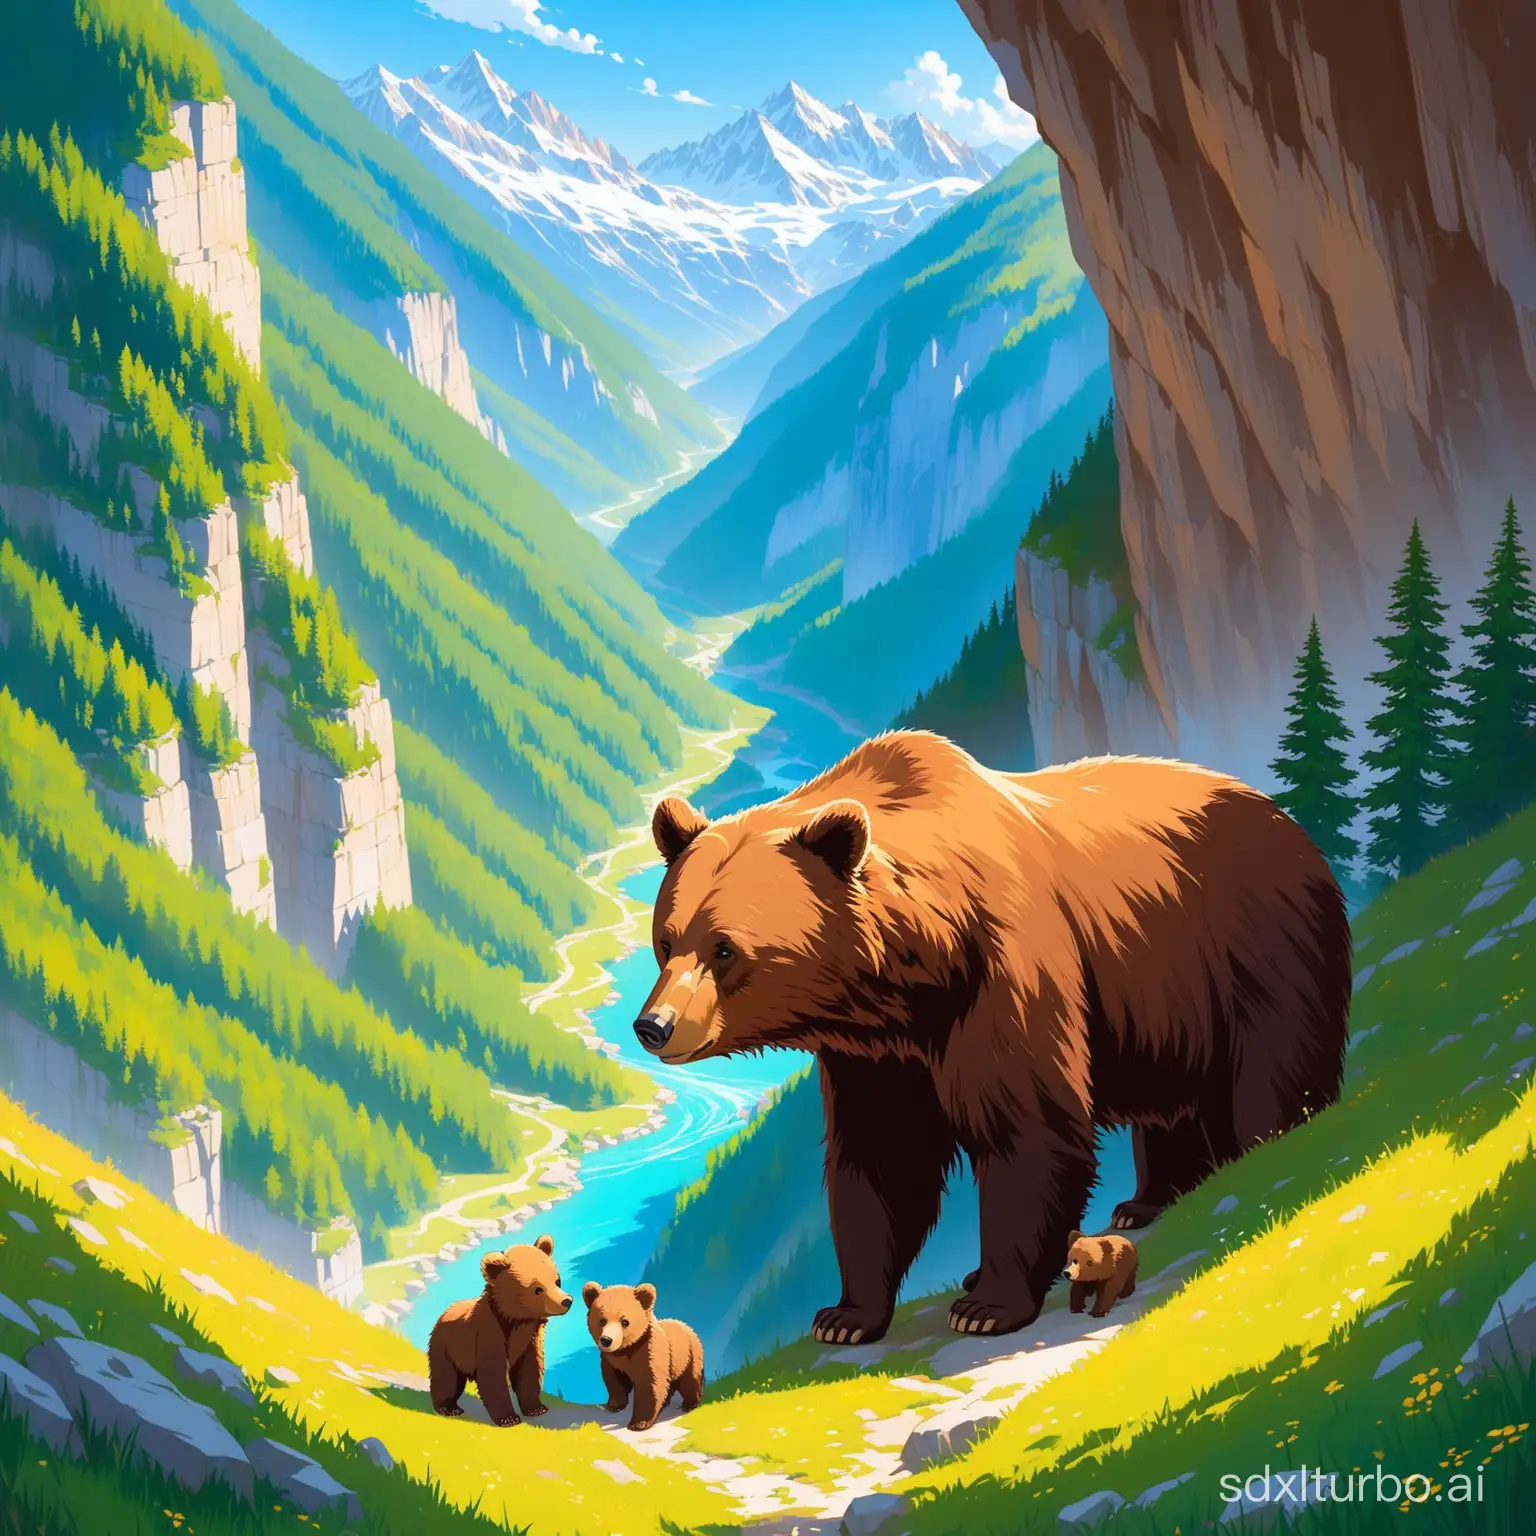 a beautiful high mountain gorge, with a cozy cave, a mama bear and a little cub